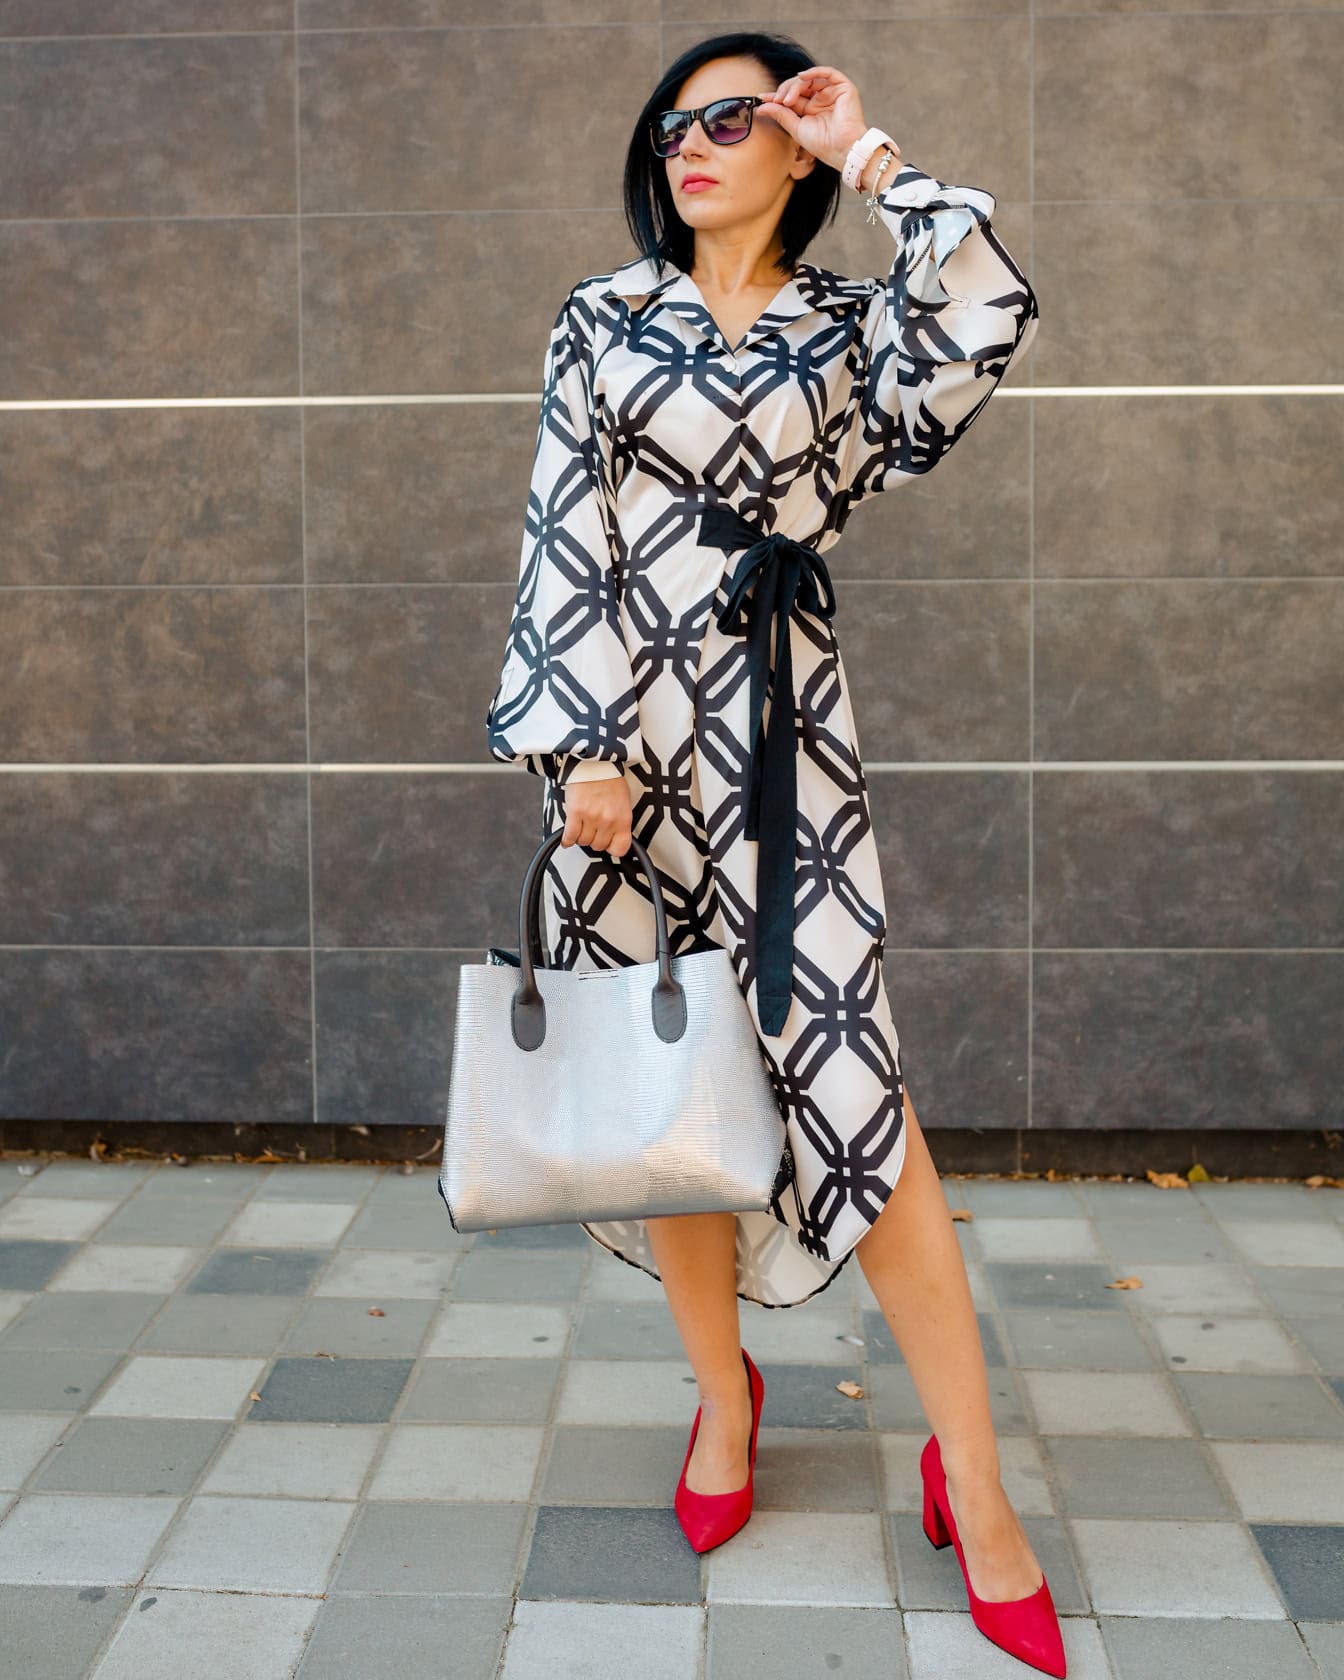 Pretty young woman posing in a black and white dress and red sandals while holding sunglasses in one hand and grayish handbag in another